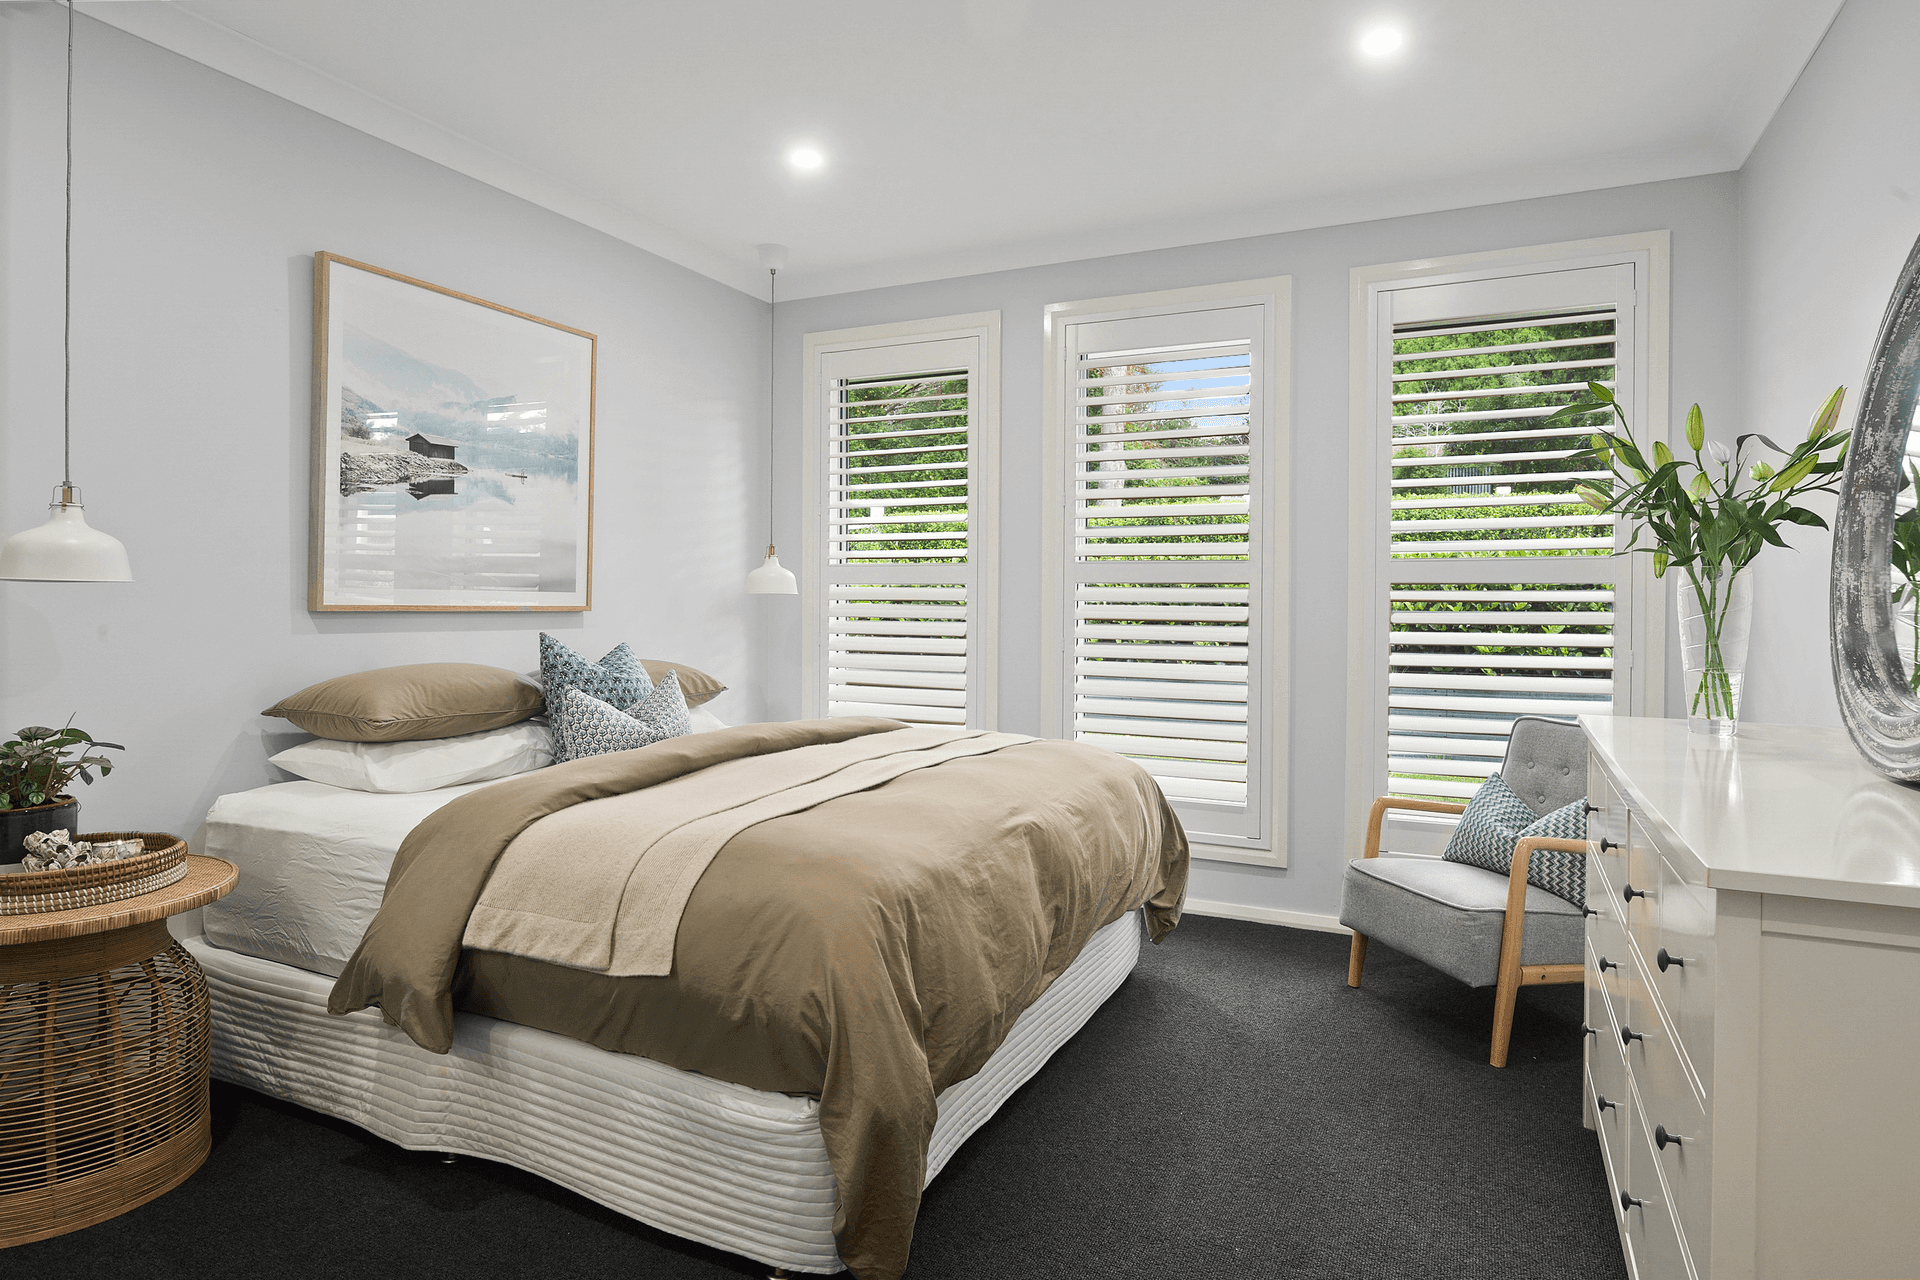 53 Mary Street, Mittagong, NSW 2575